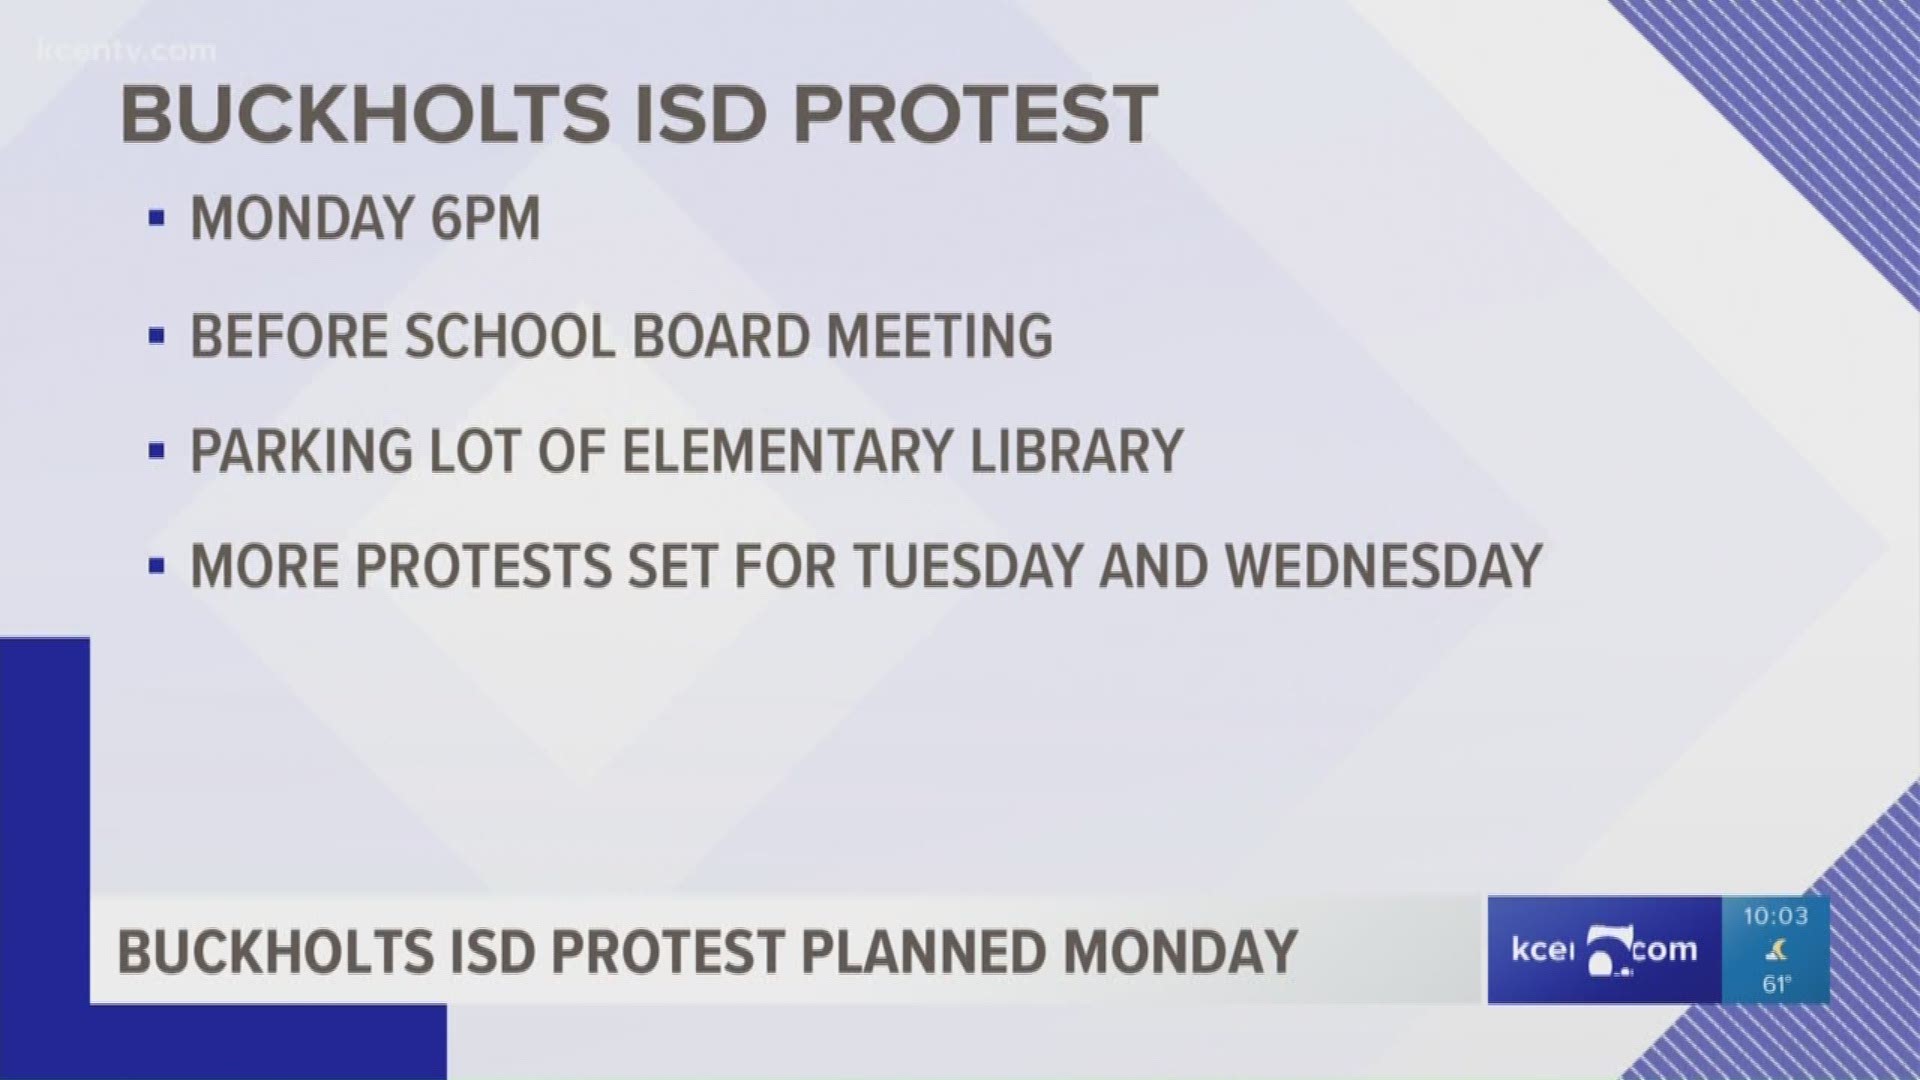 The community is planning the protest in response to the firings of several Buckholts teachers and administrators.